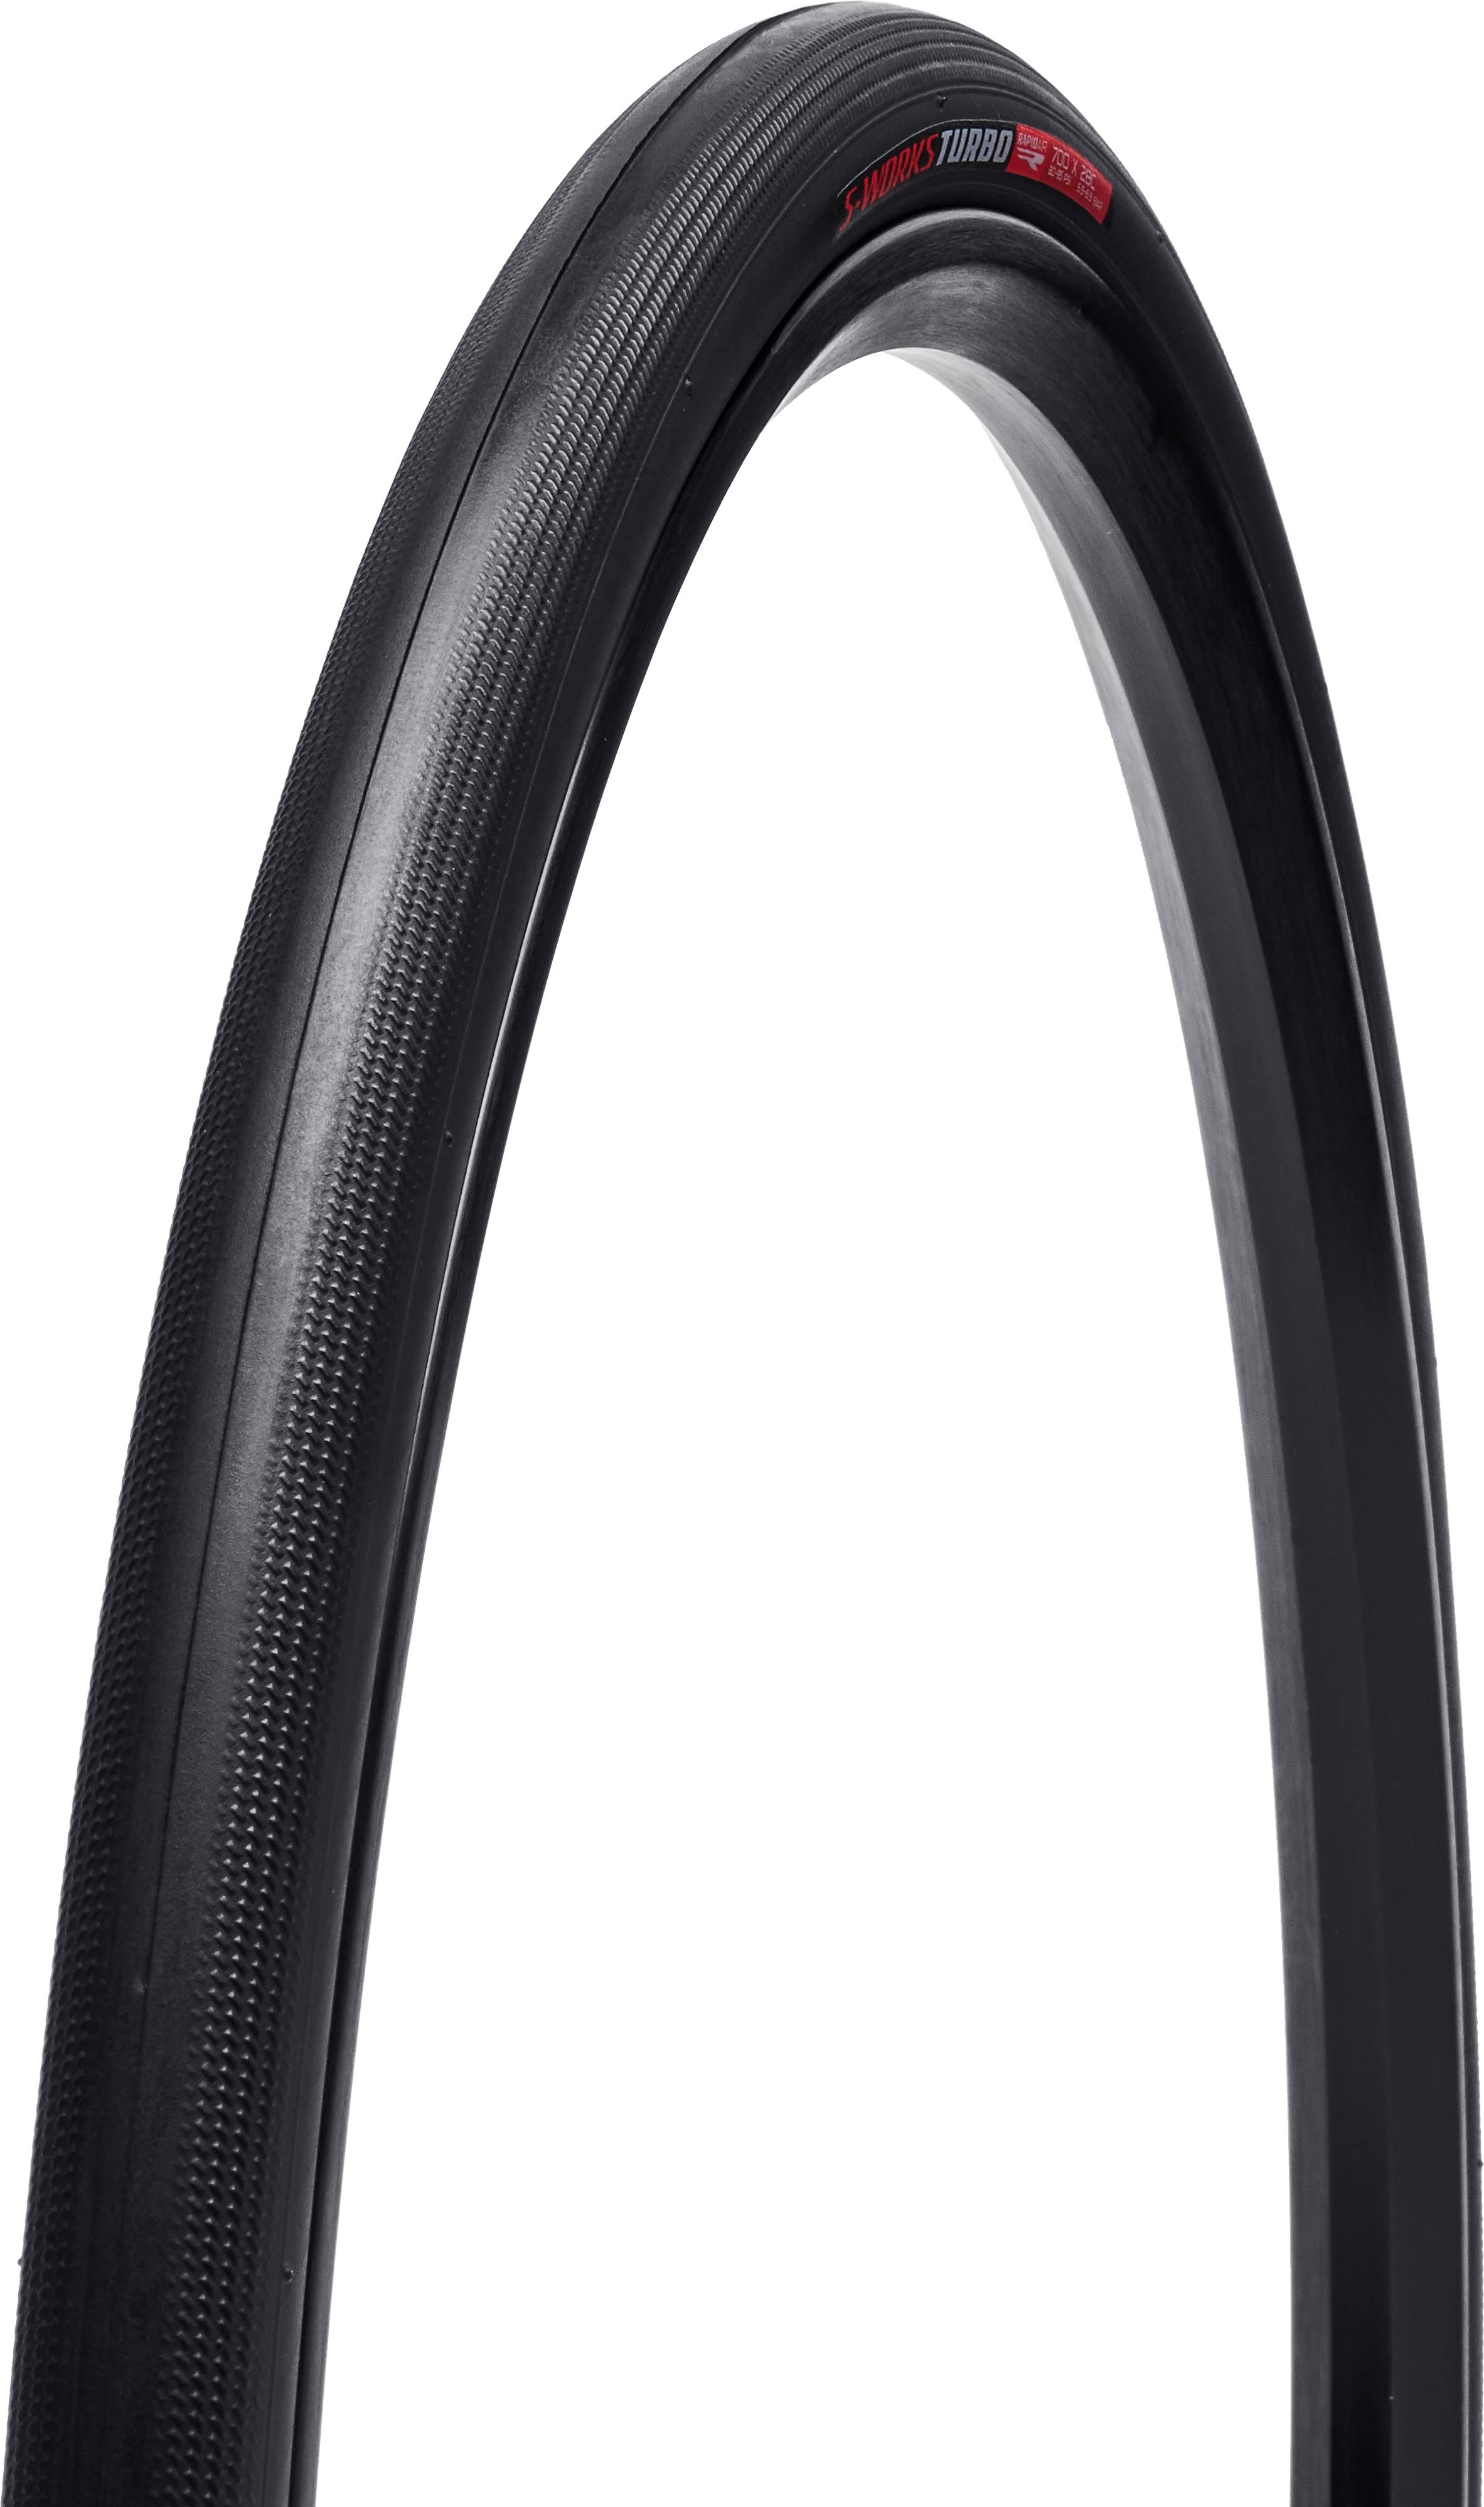 Specialized S-Works Turbo RapidAir Tubeless Ready Tyre, Black